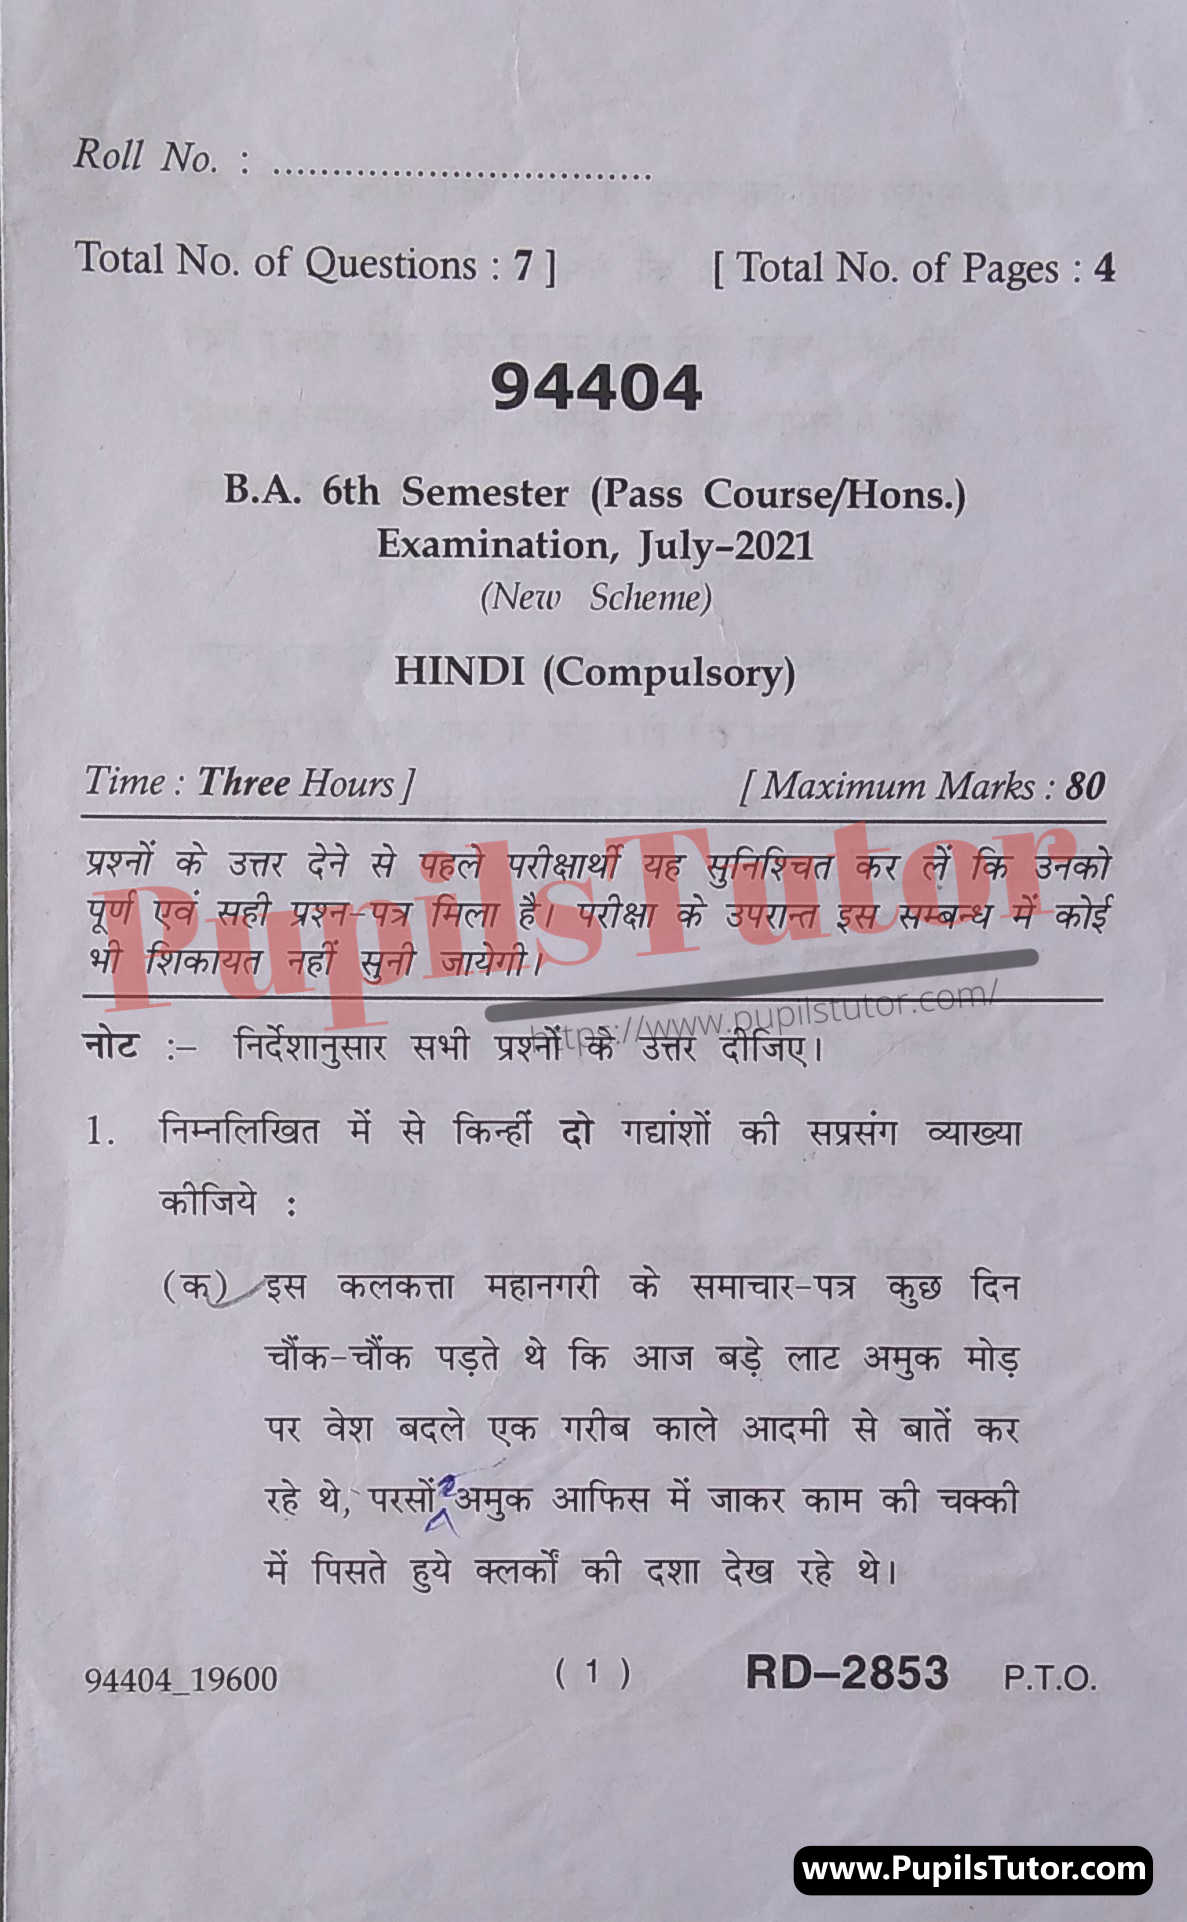 MDU (Maharshi Dayanand University, Rohtak Haryana) BA Pass Course And Honors Sixth Semester Previous Year Hindi Question Paper For July, 2021 Exam (Question Paper Page 1) - pupilstutor.com